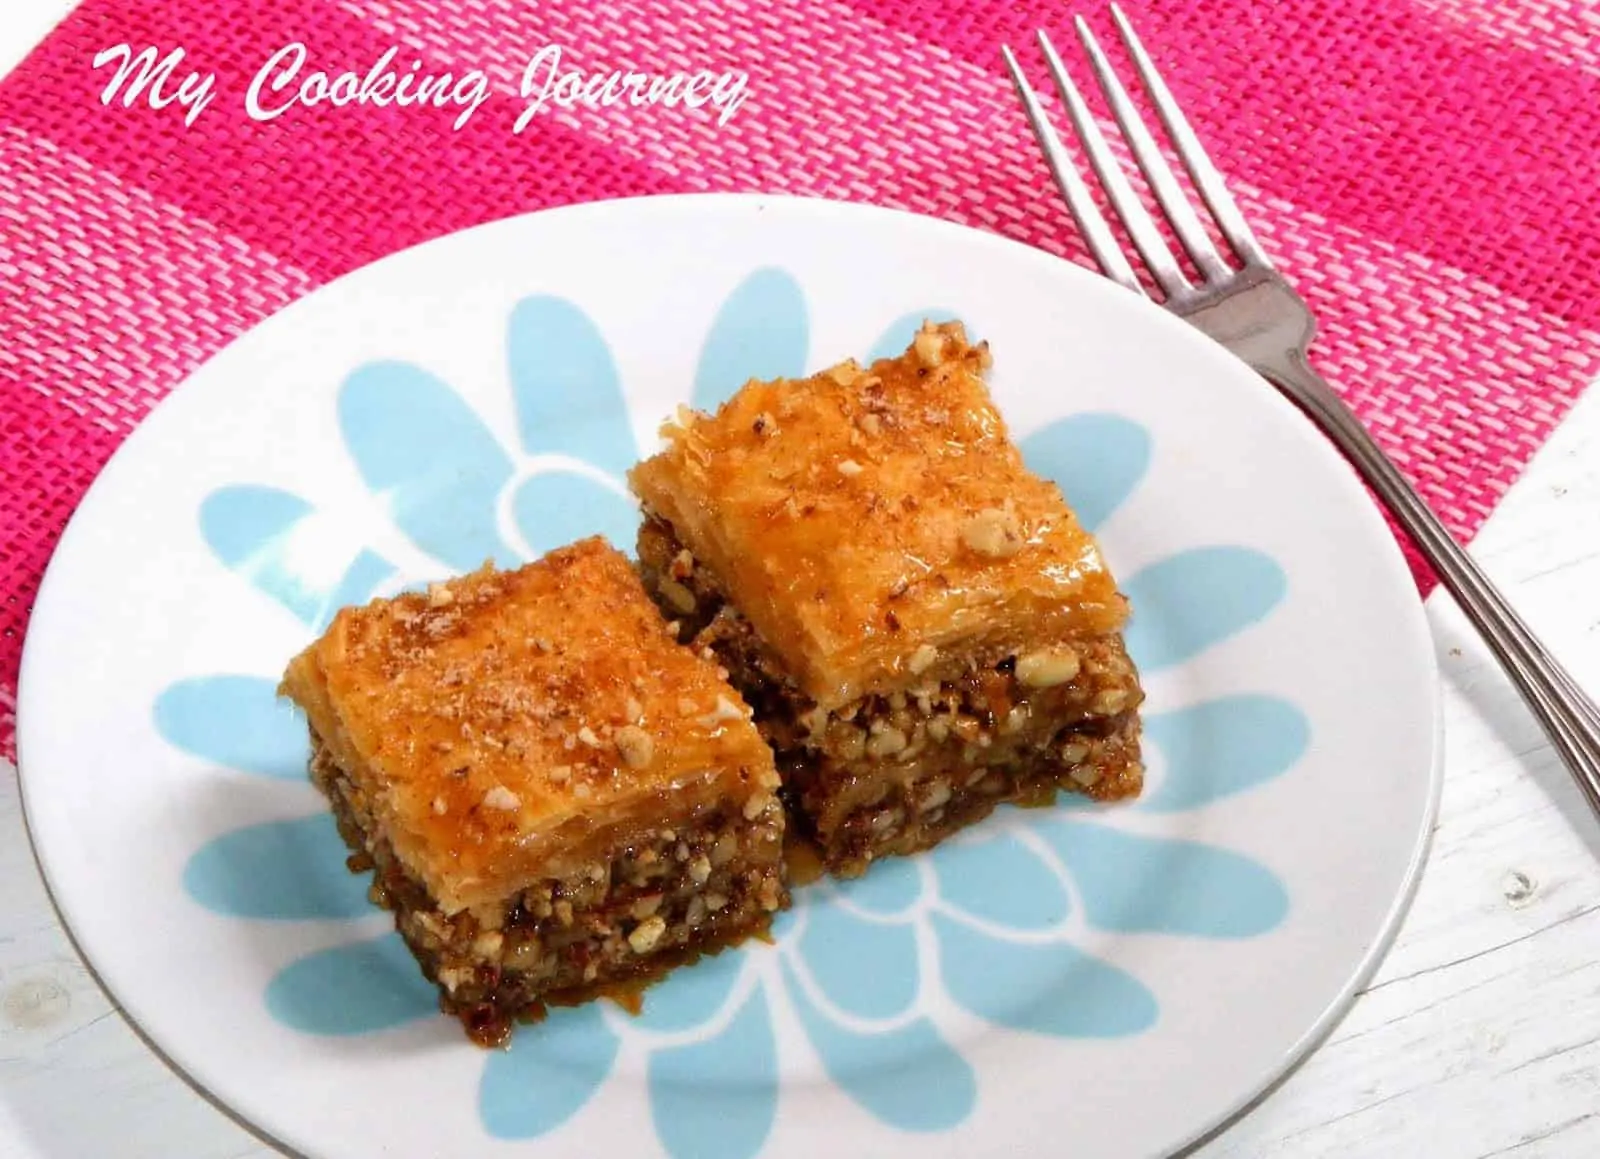 two pieces of Baklava in a plate with fork on side